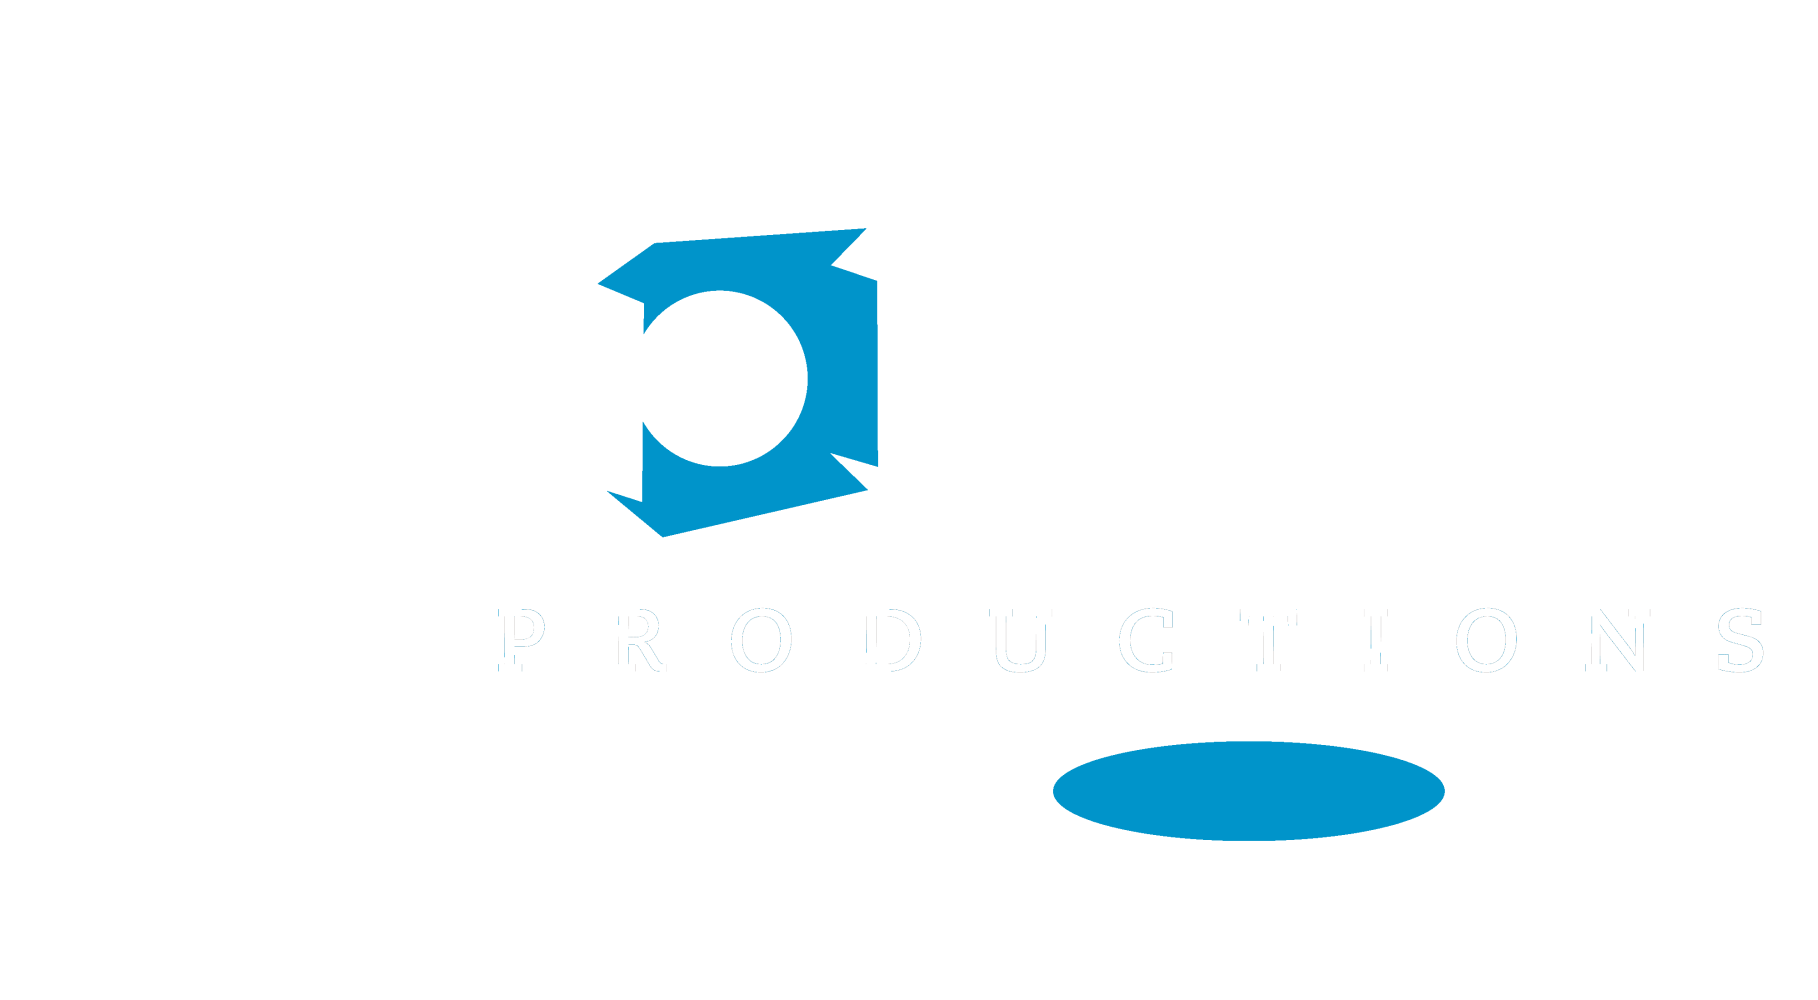 We Create | SpotOn Productions